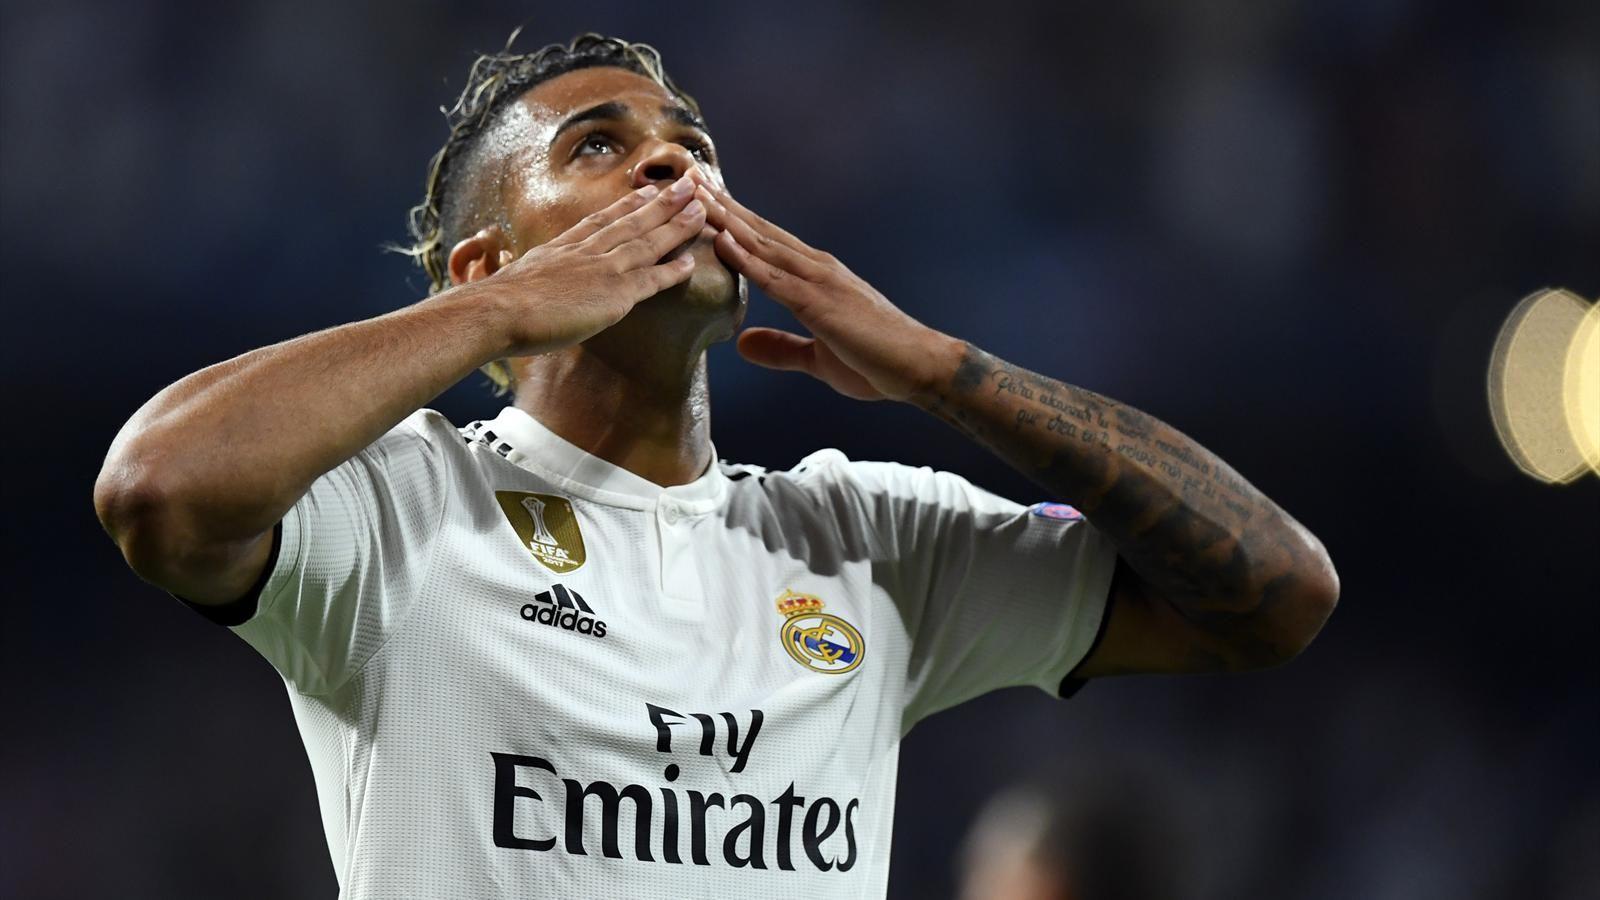 Mariano Díaz, the seven at home